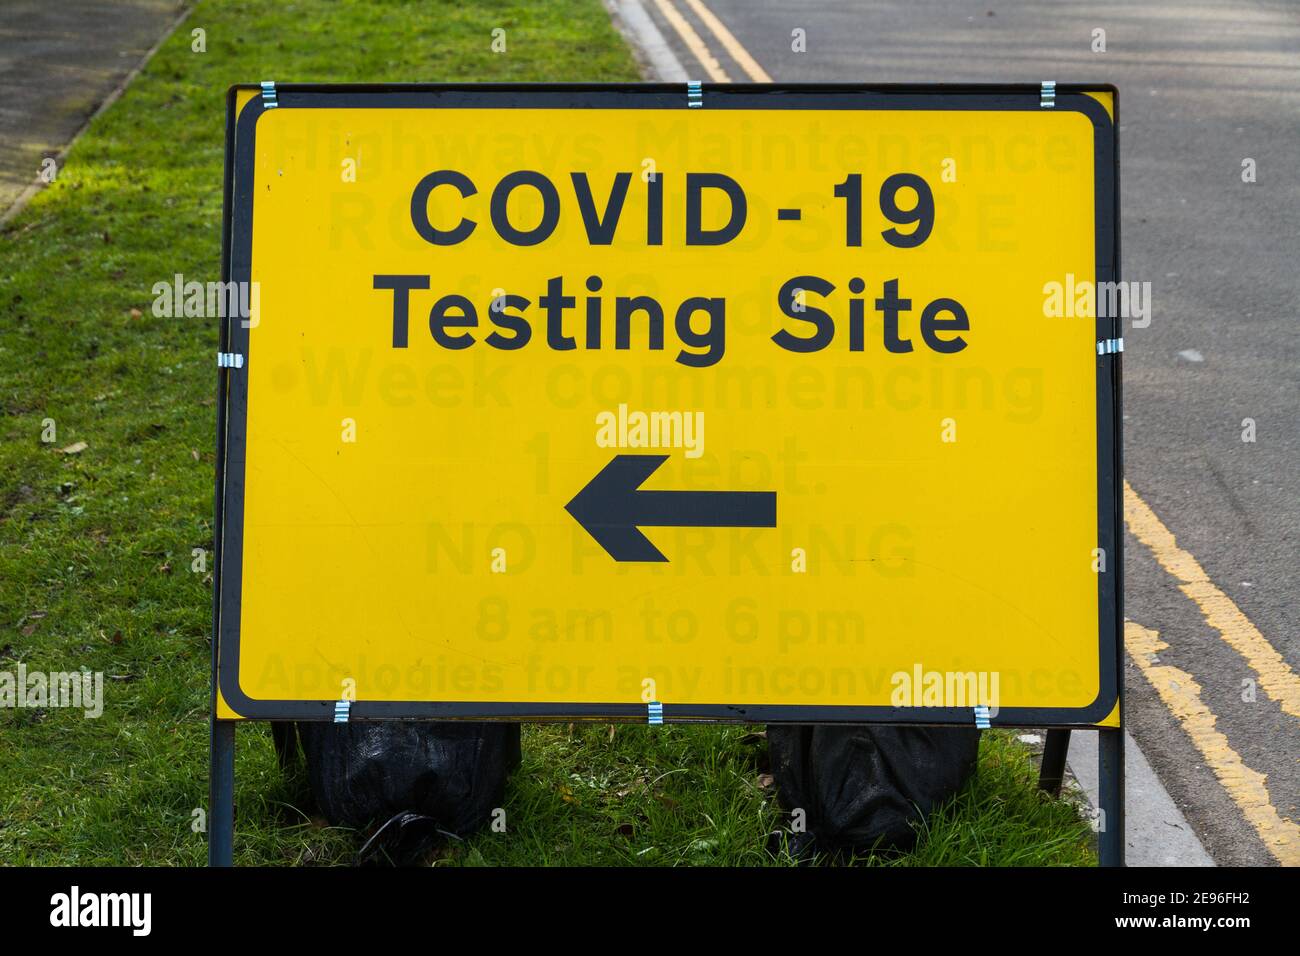 BOURNEMOUTH, ENGLAND - JANUARY 17 2021: Sign for Covid-19 testing site Stock Photo